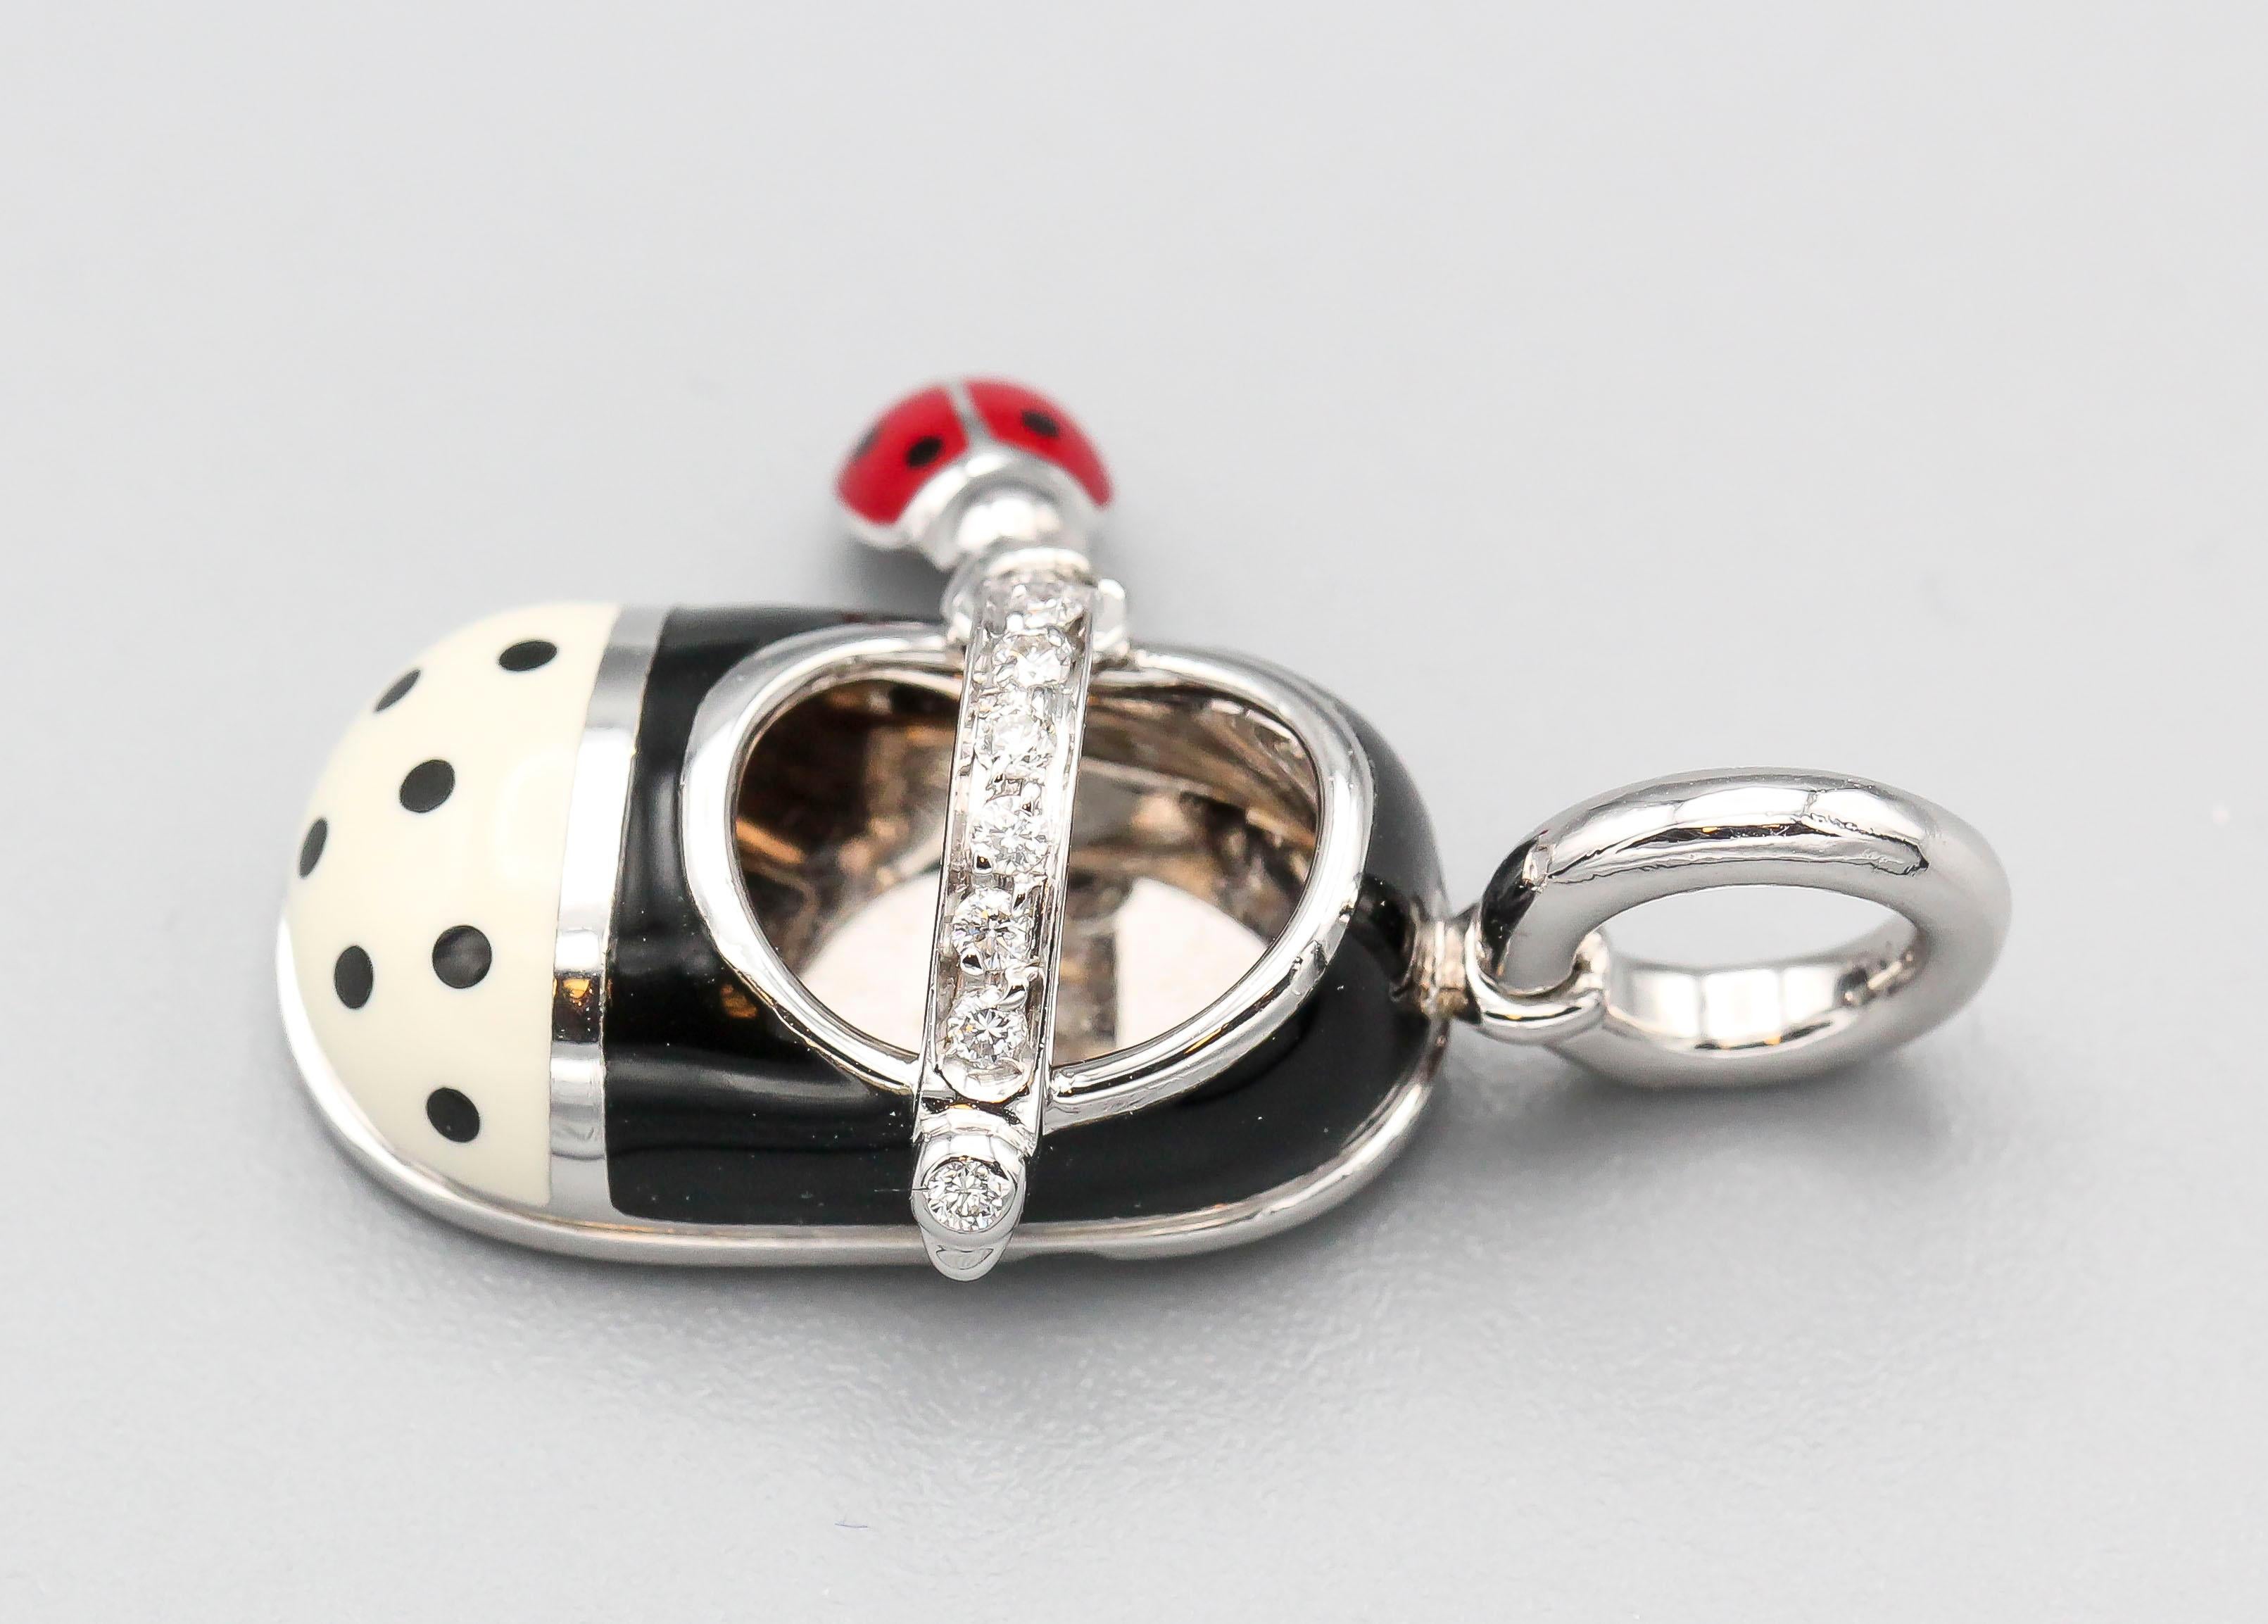 Fine diamond with polka dot enamel and 18K white gold baby girl shoe charm by Aaron Basha. Features high grade round brilliant cut diamonds by the strap of the shoe along with a small attached ladybug charm.

Hallmarks: Aaron Basha,  750, Italian